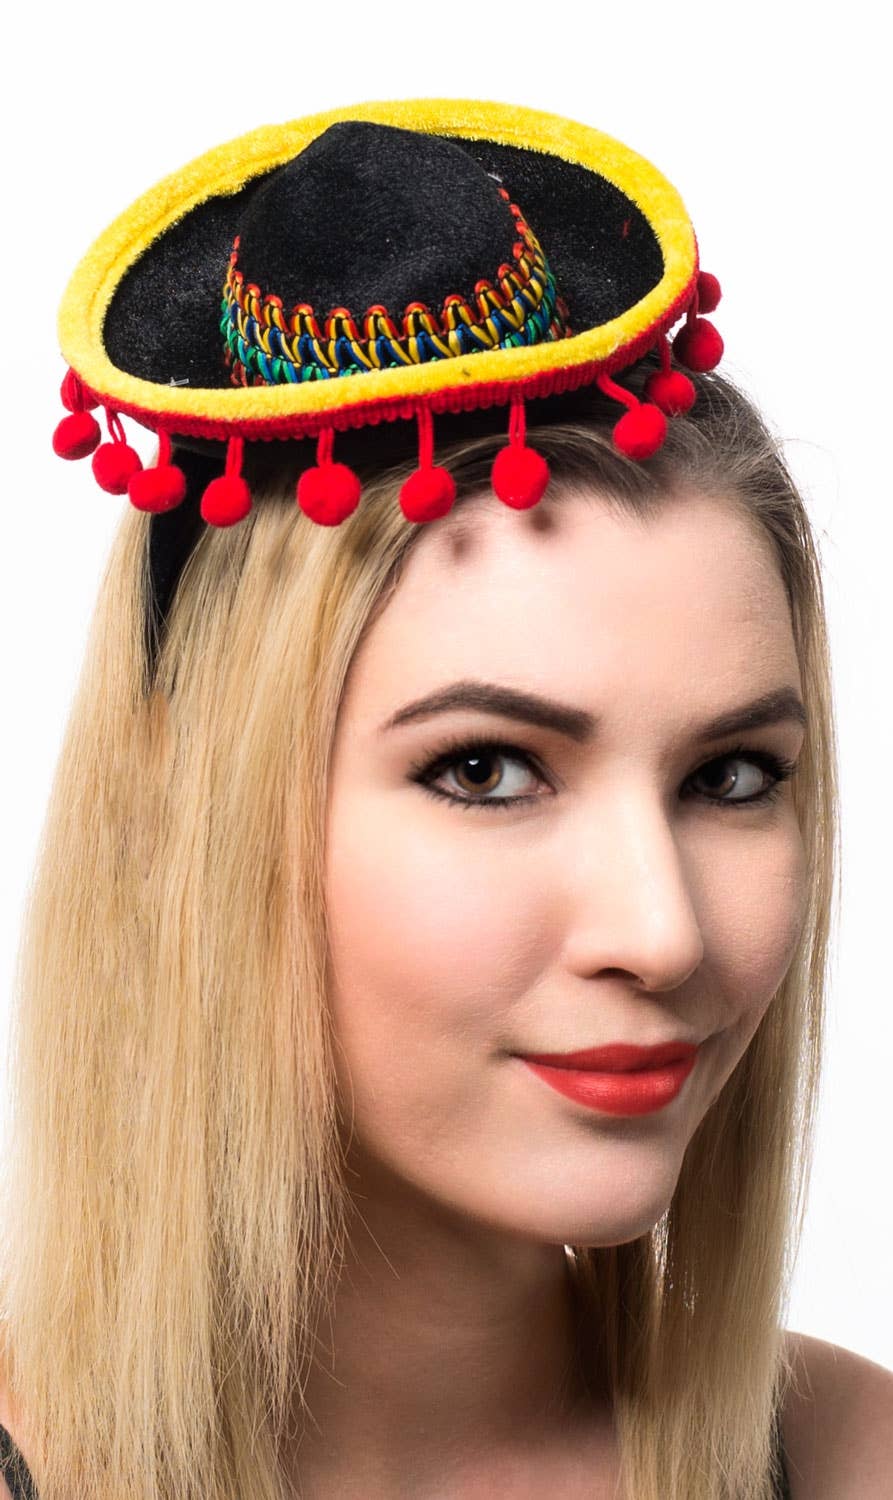 Black, Yellow and Red Mini Mexican Sombrero Costume Hat on Headband Main Image